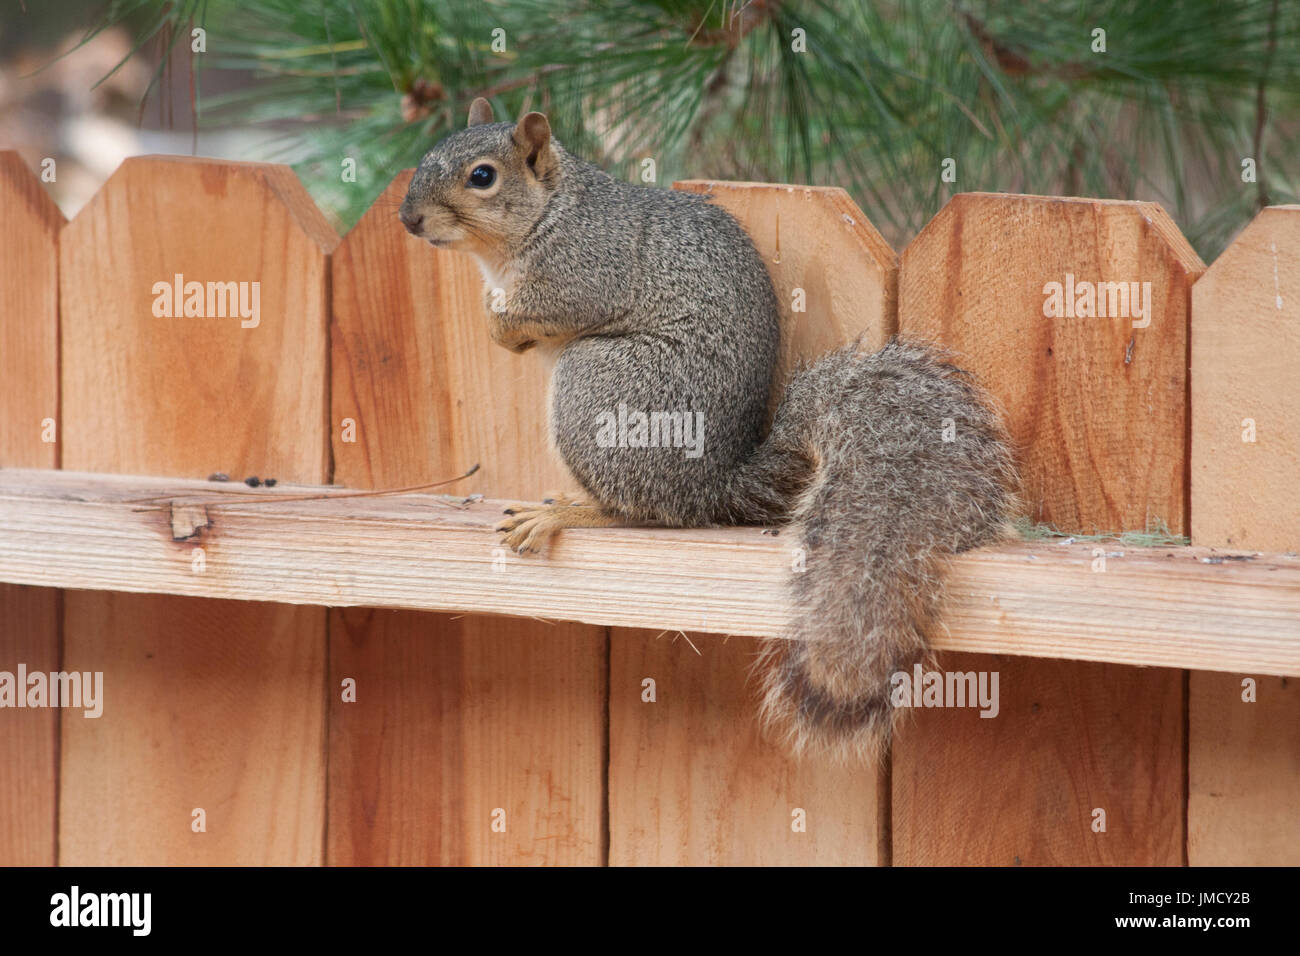 A tree squirrel standing watch on a fence in Seaside California Stock Photo